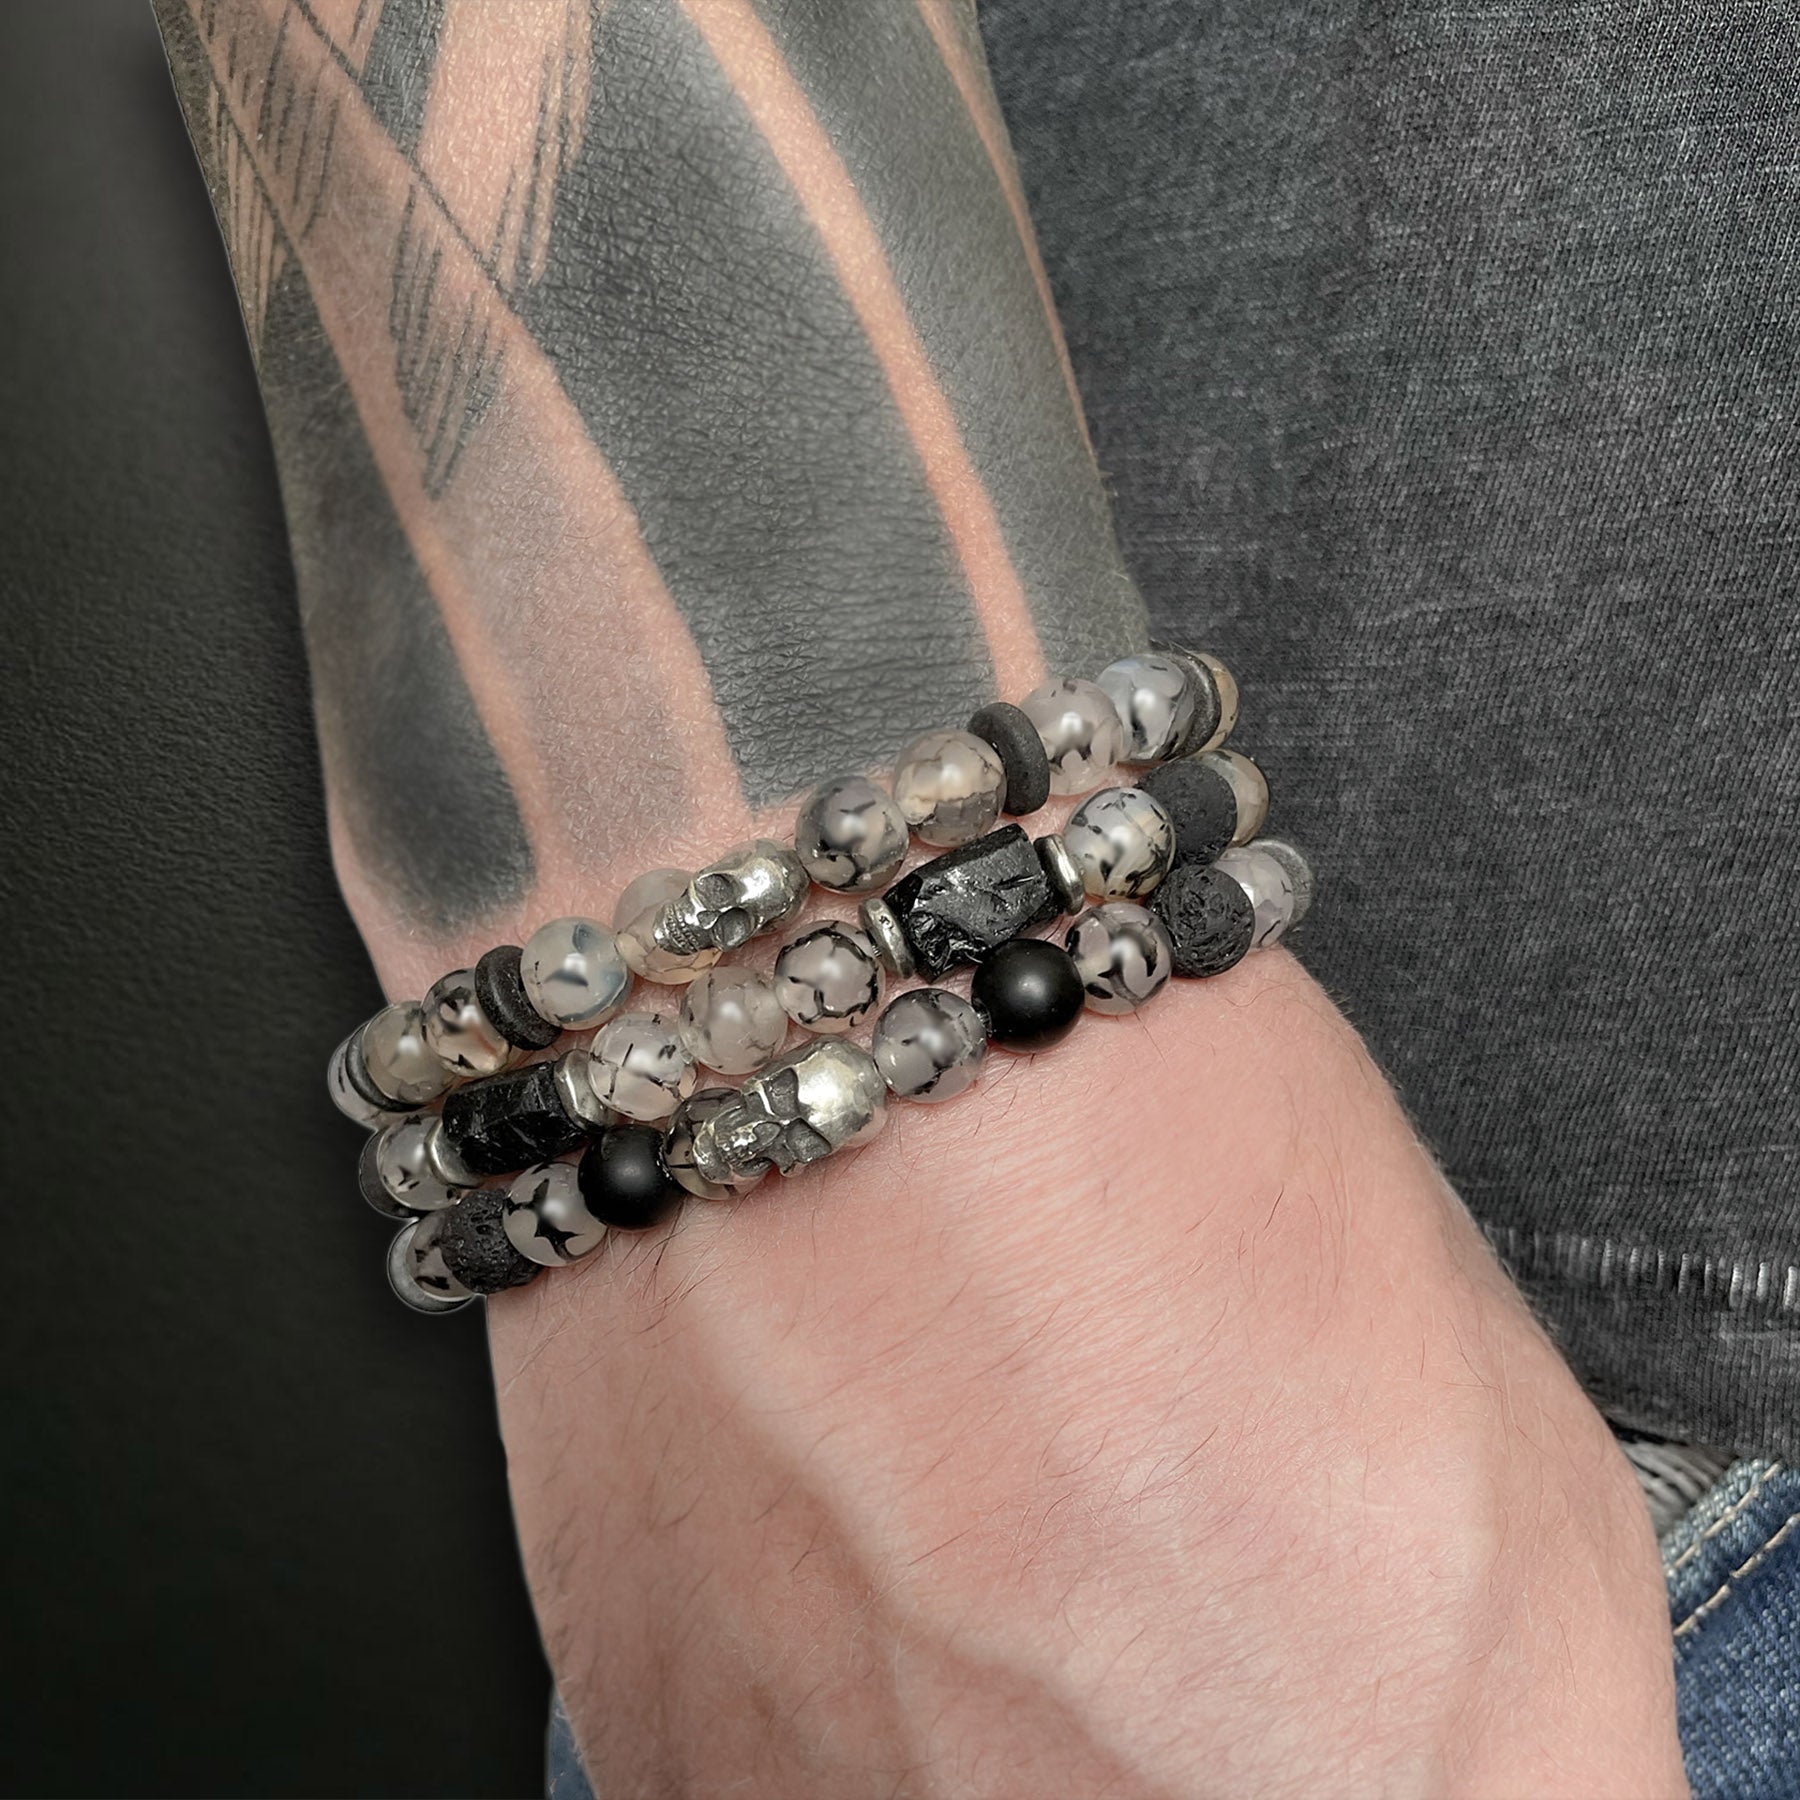 dragon vein and skull stack bracelet set by Rock my Wings